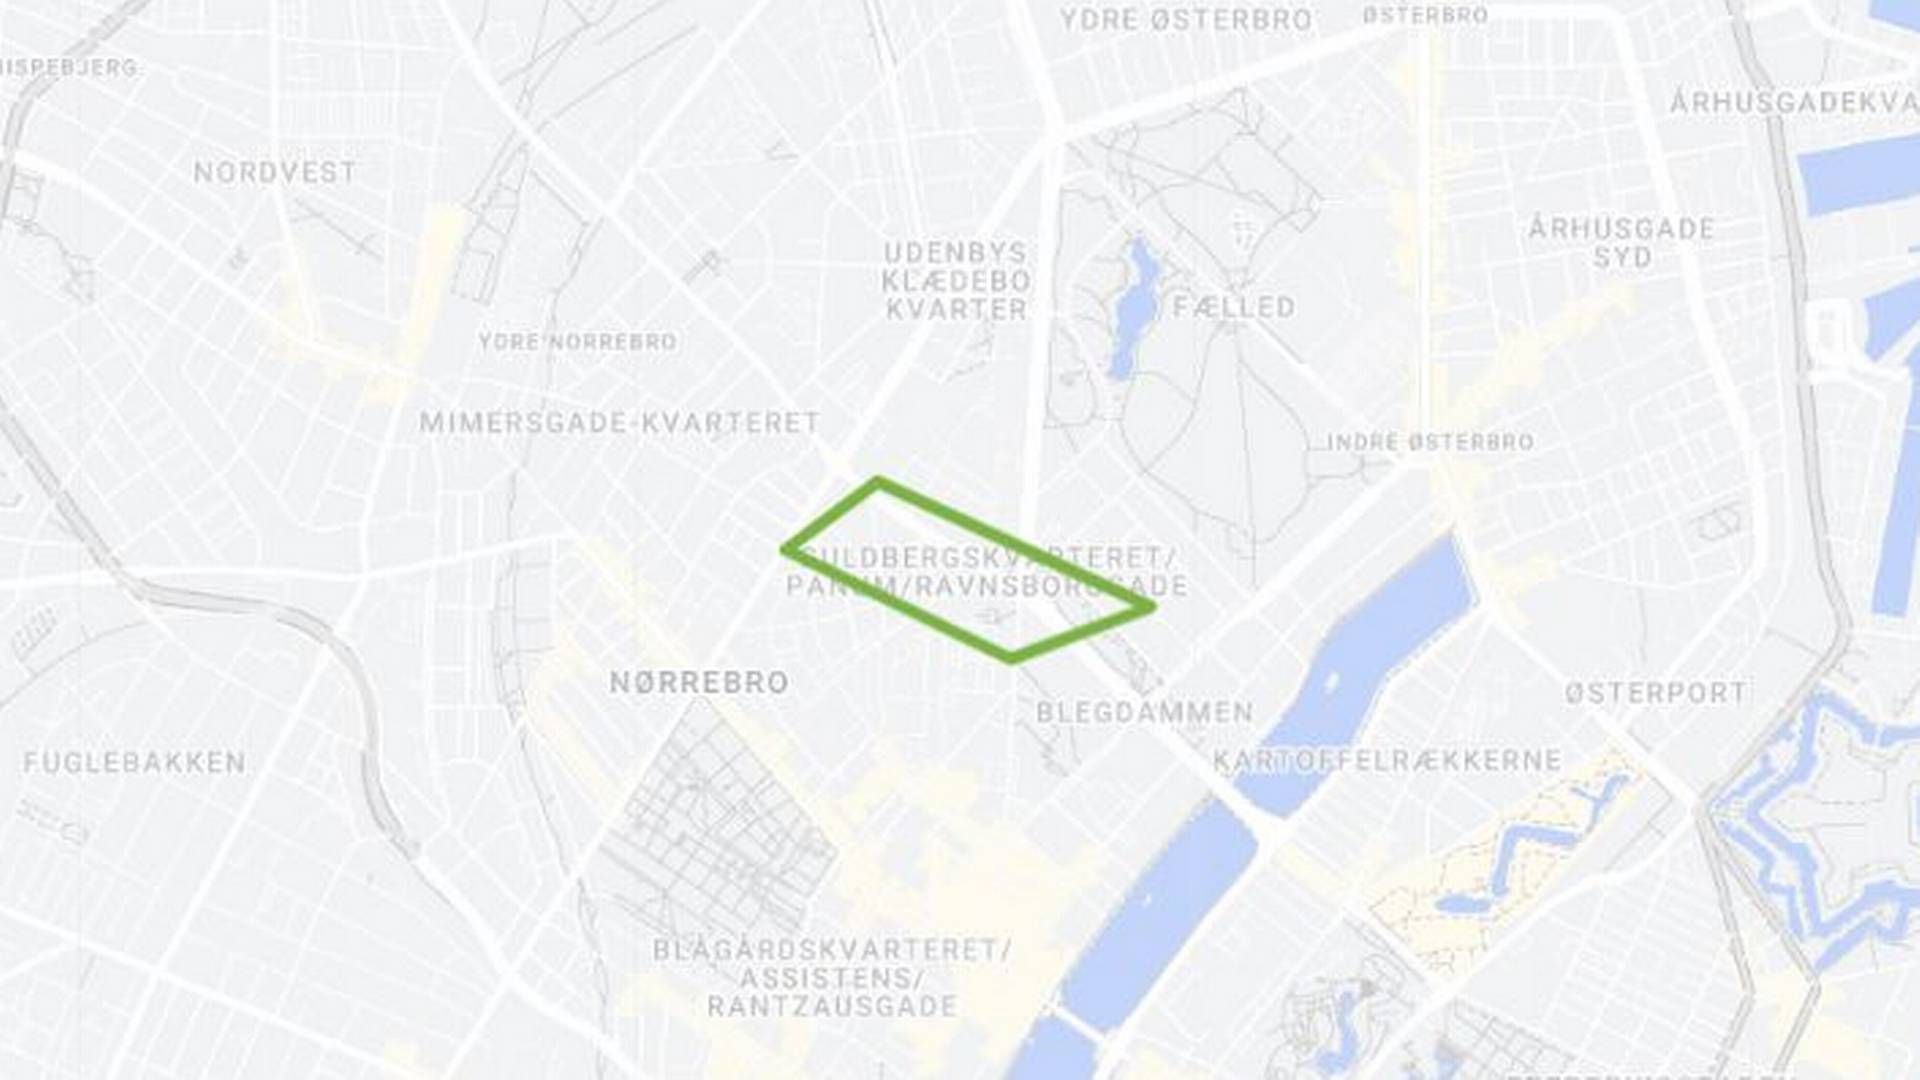 This area in Copenhagen has been identified as the site for the Innovation District.